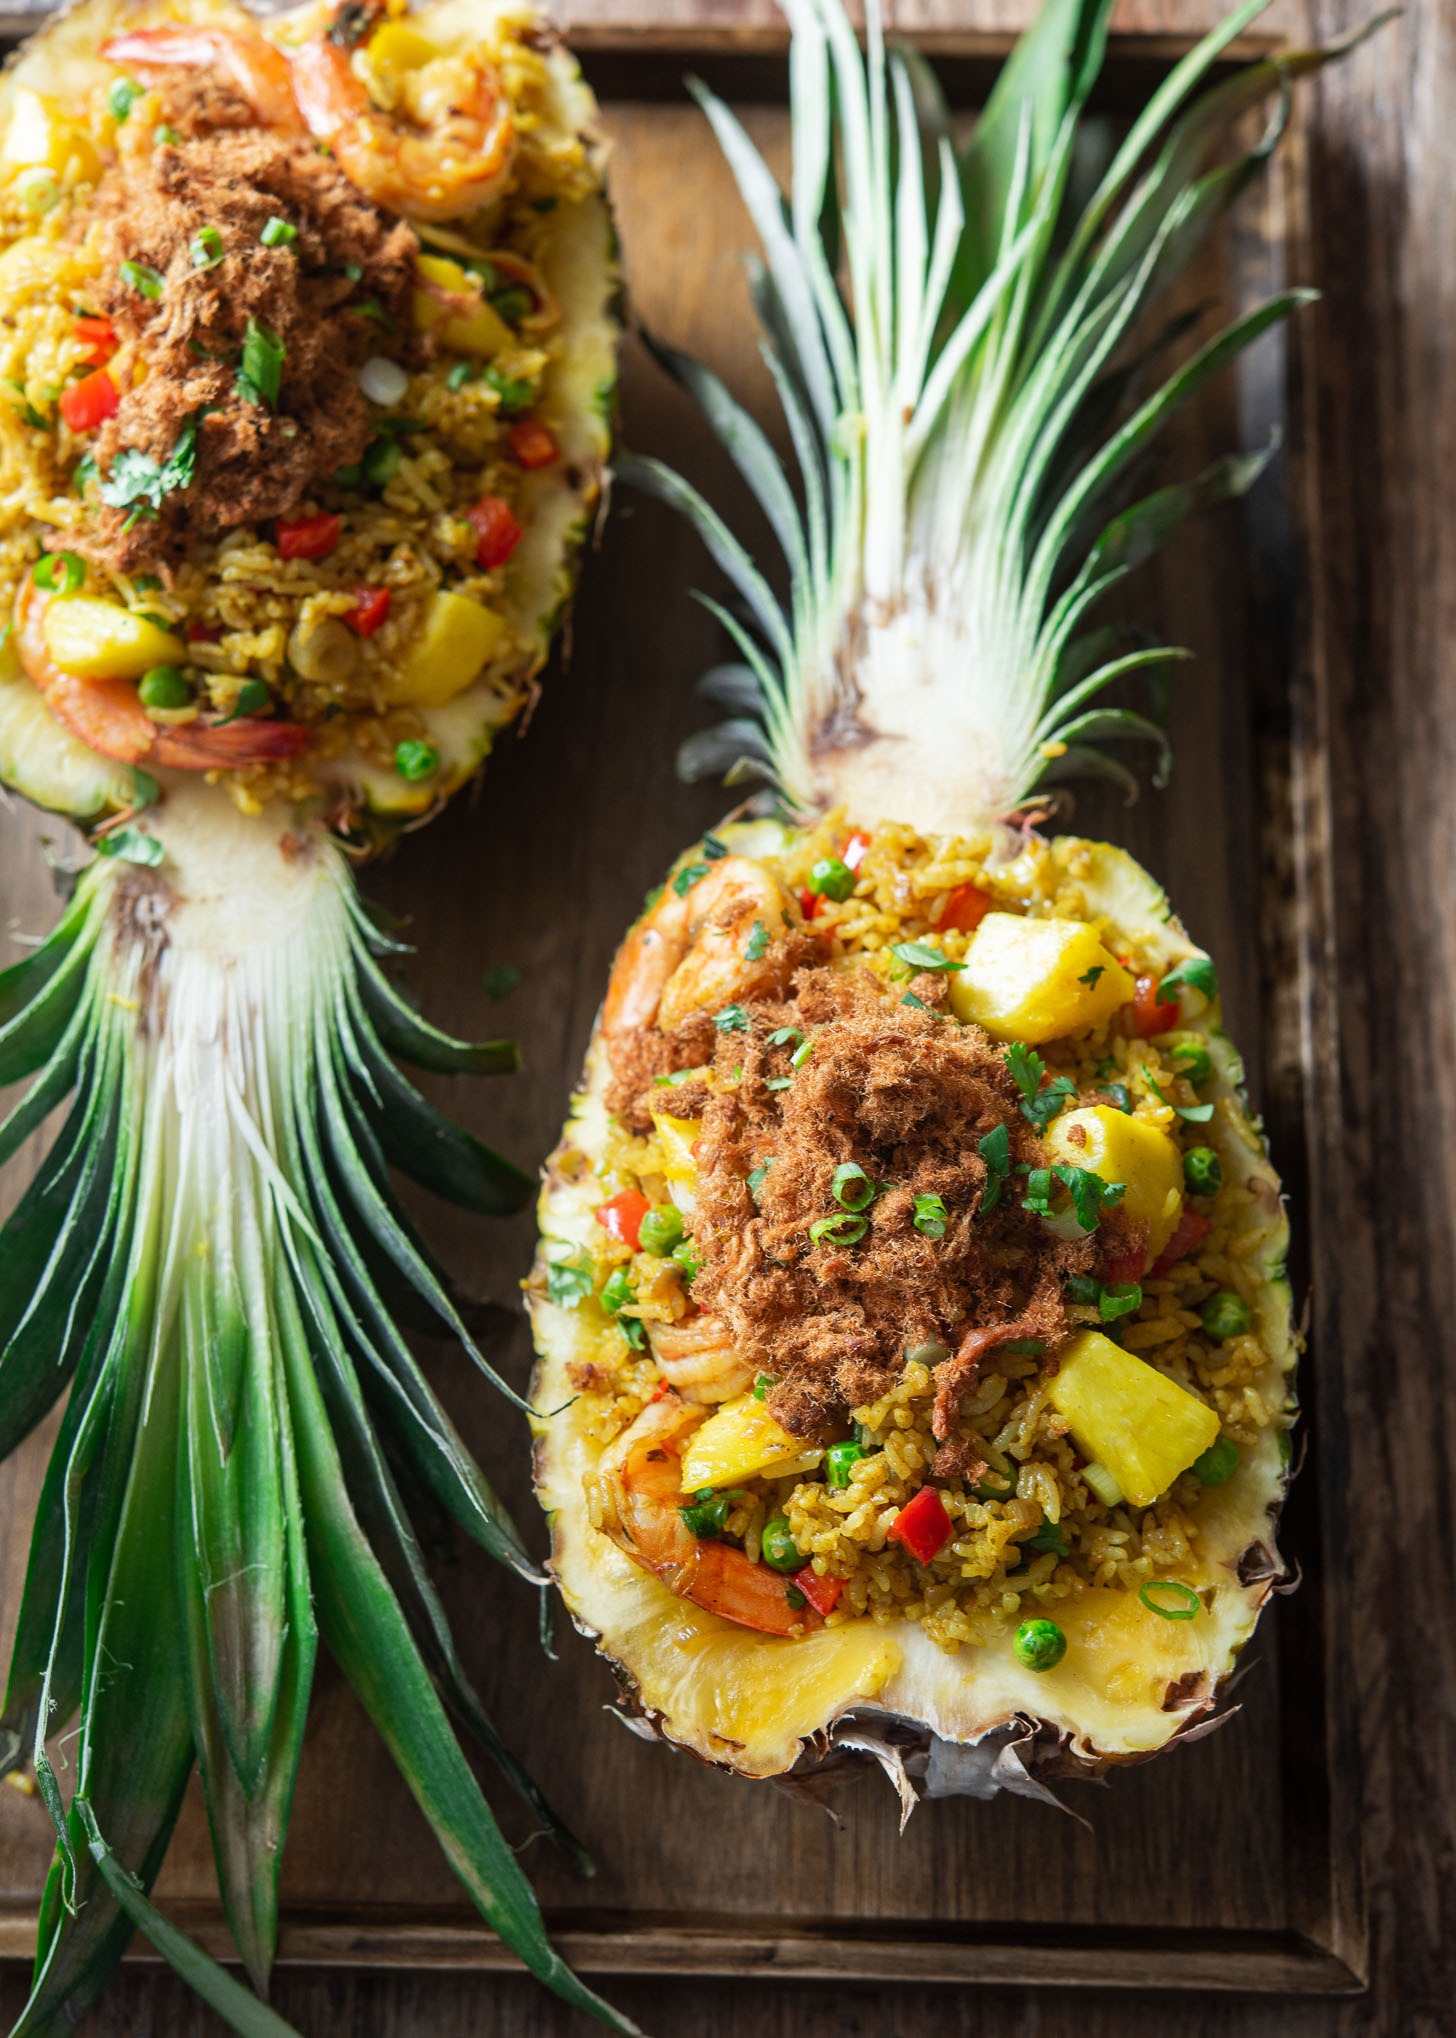 Pineapple fried rice is served in two pineapple boats topped with pork floss.